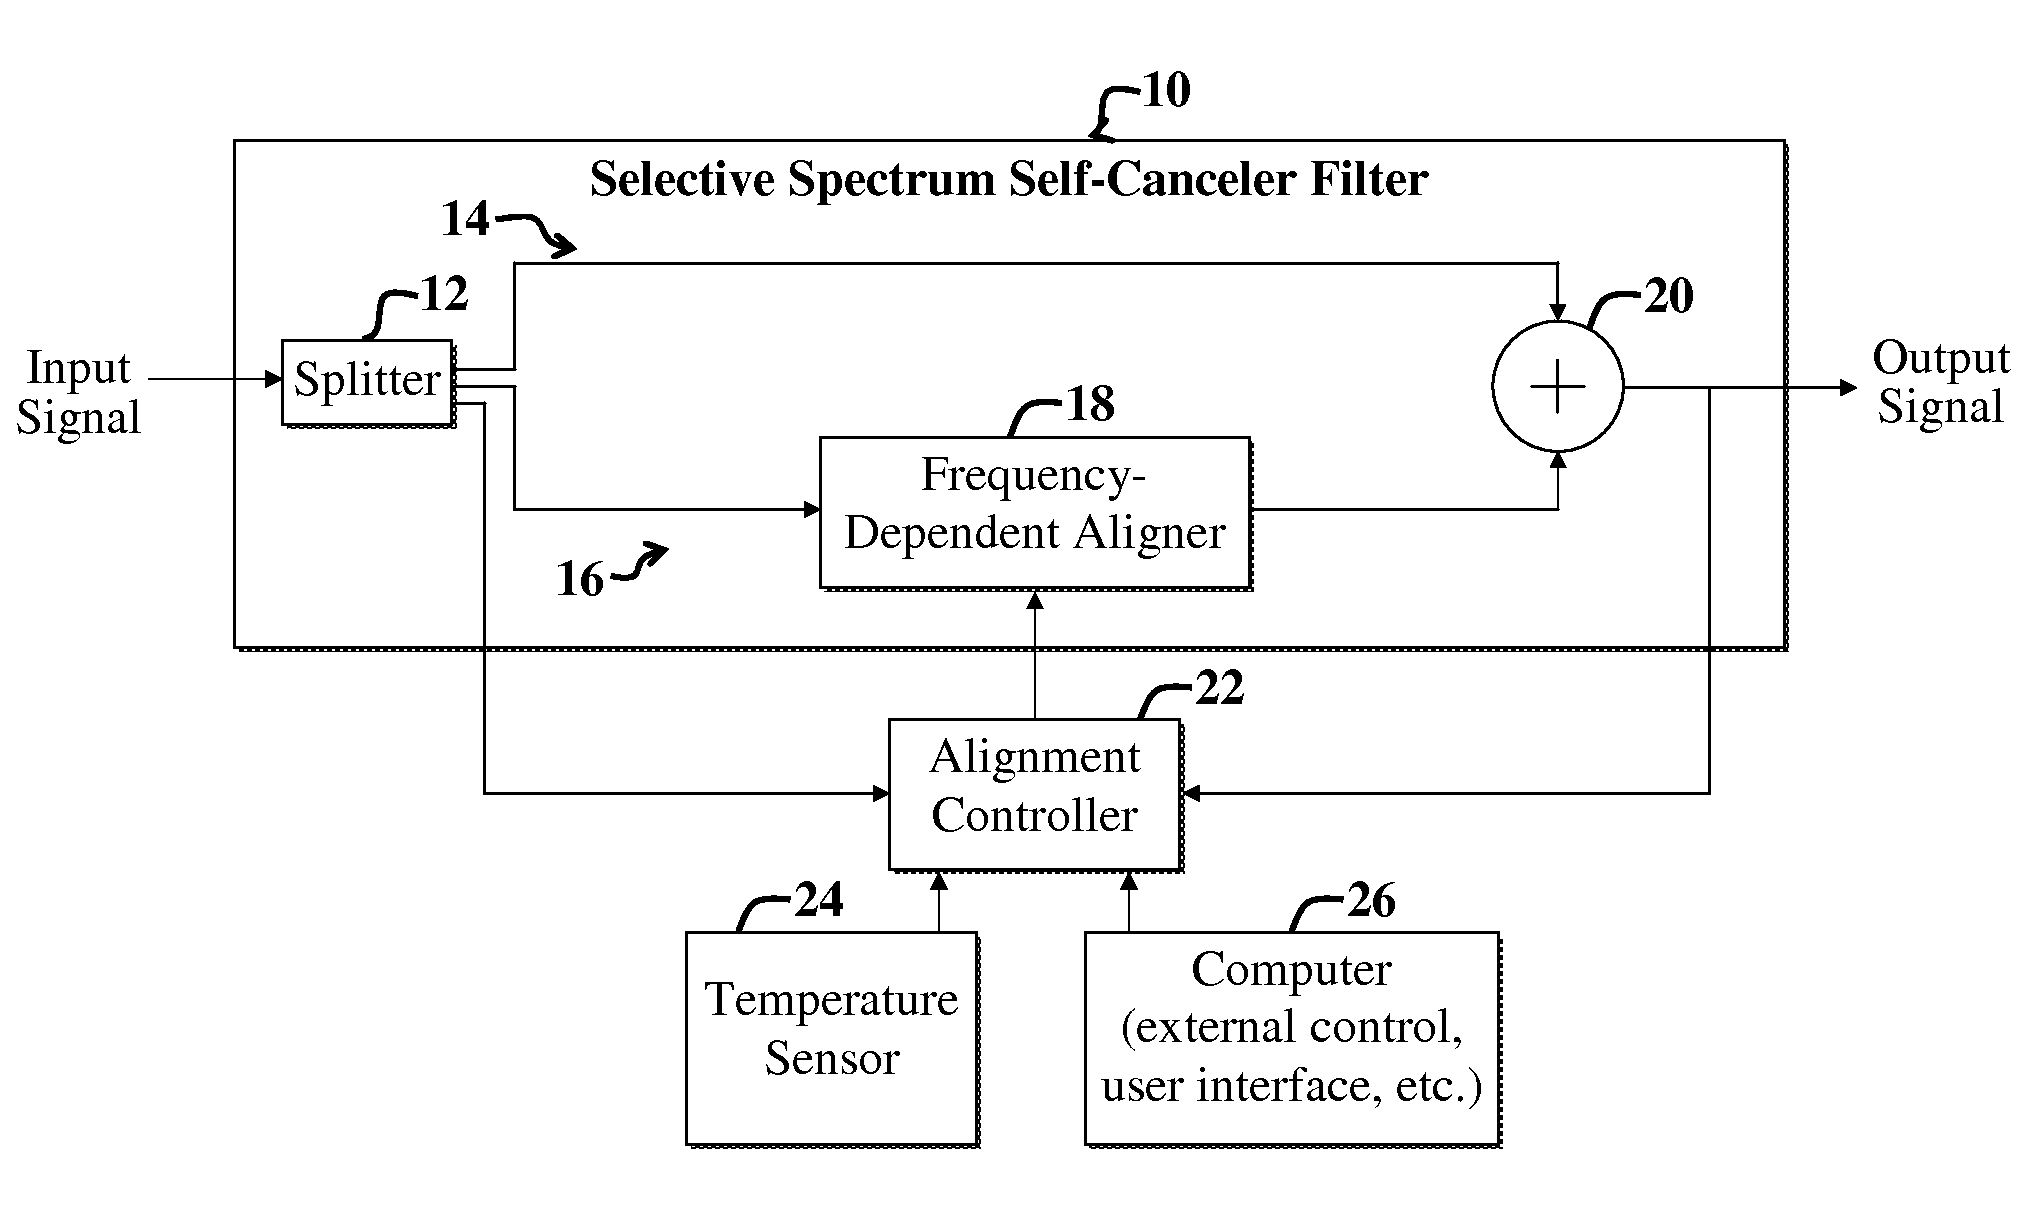 Filter shaping using a signal cancellation function